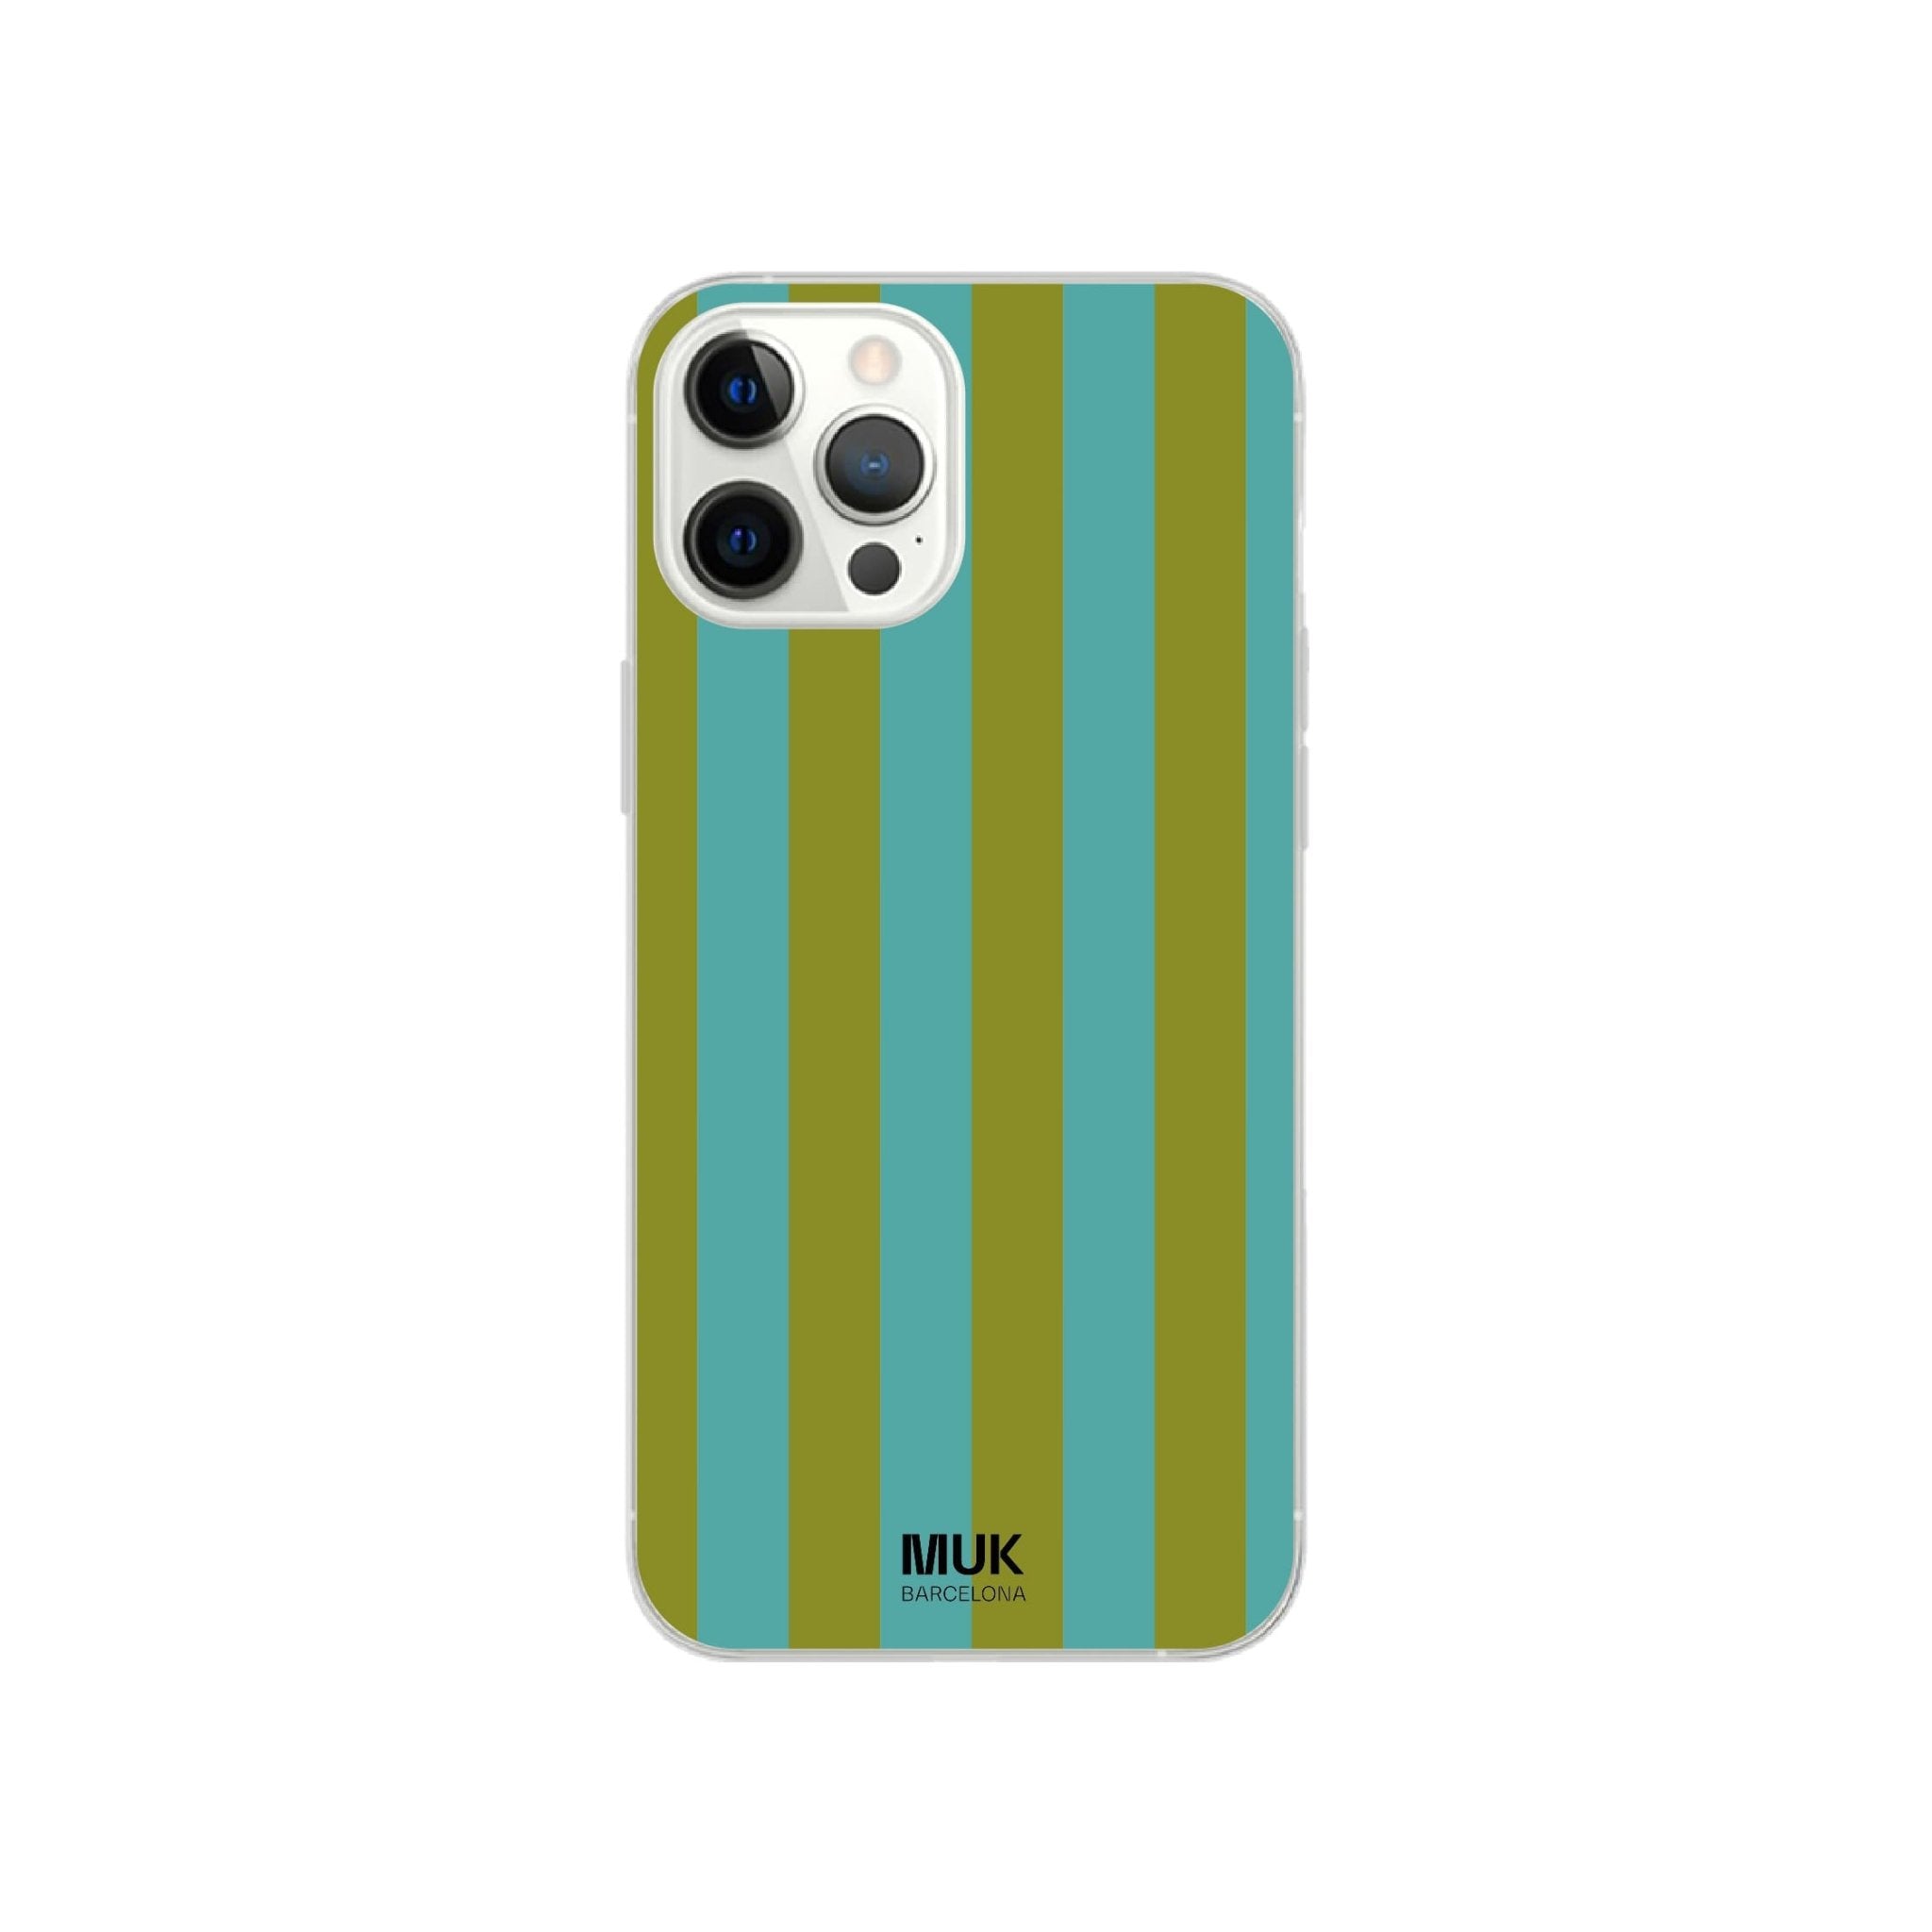 Clear phone case with green and turquoise blue stripes.
